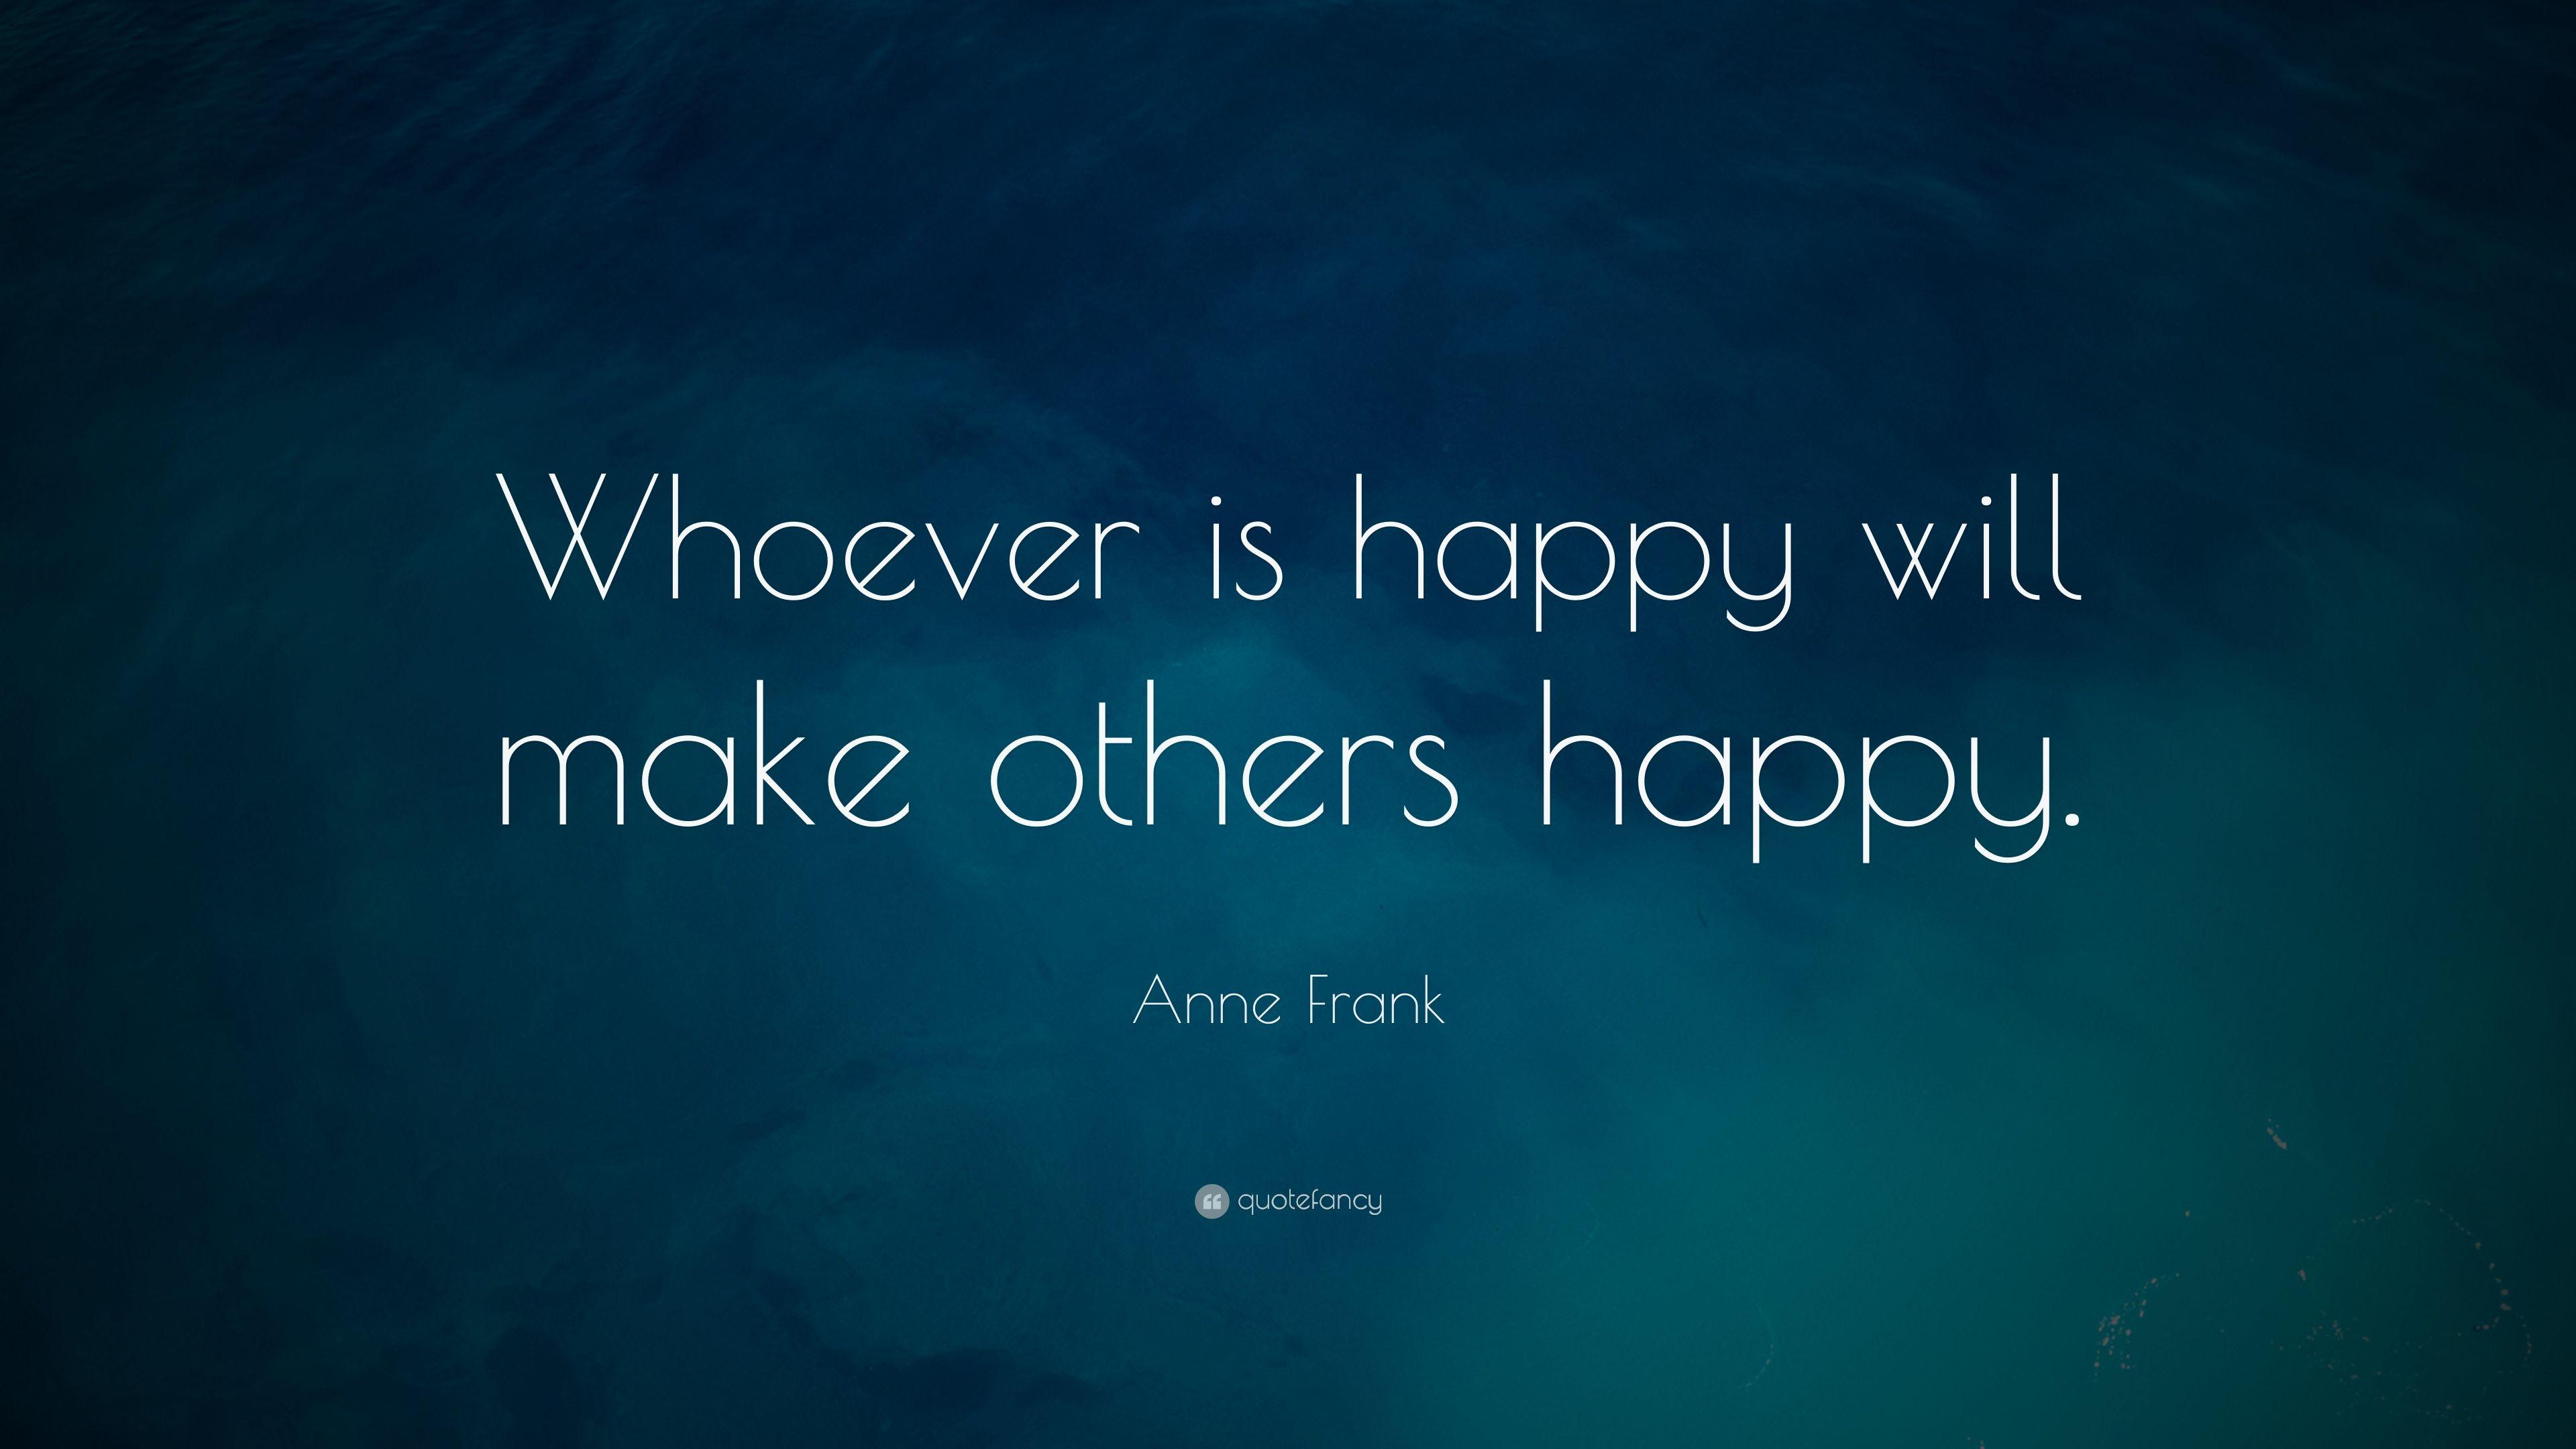 Anne Frank Quote: “Whoever is happy will make others happy.” 14